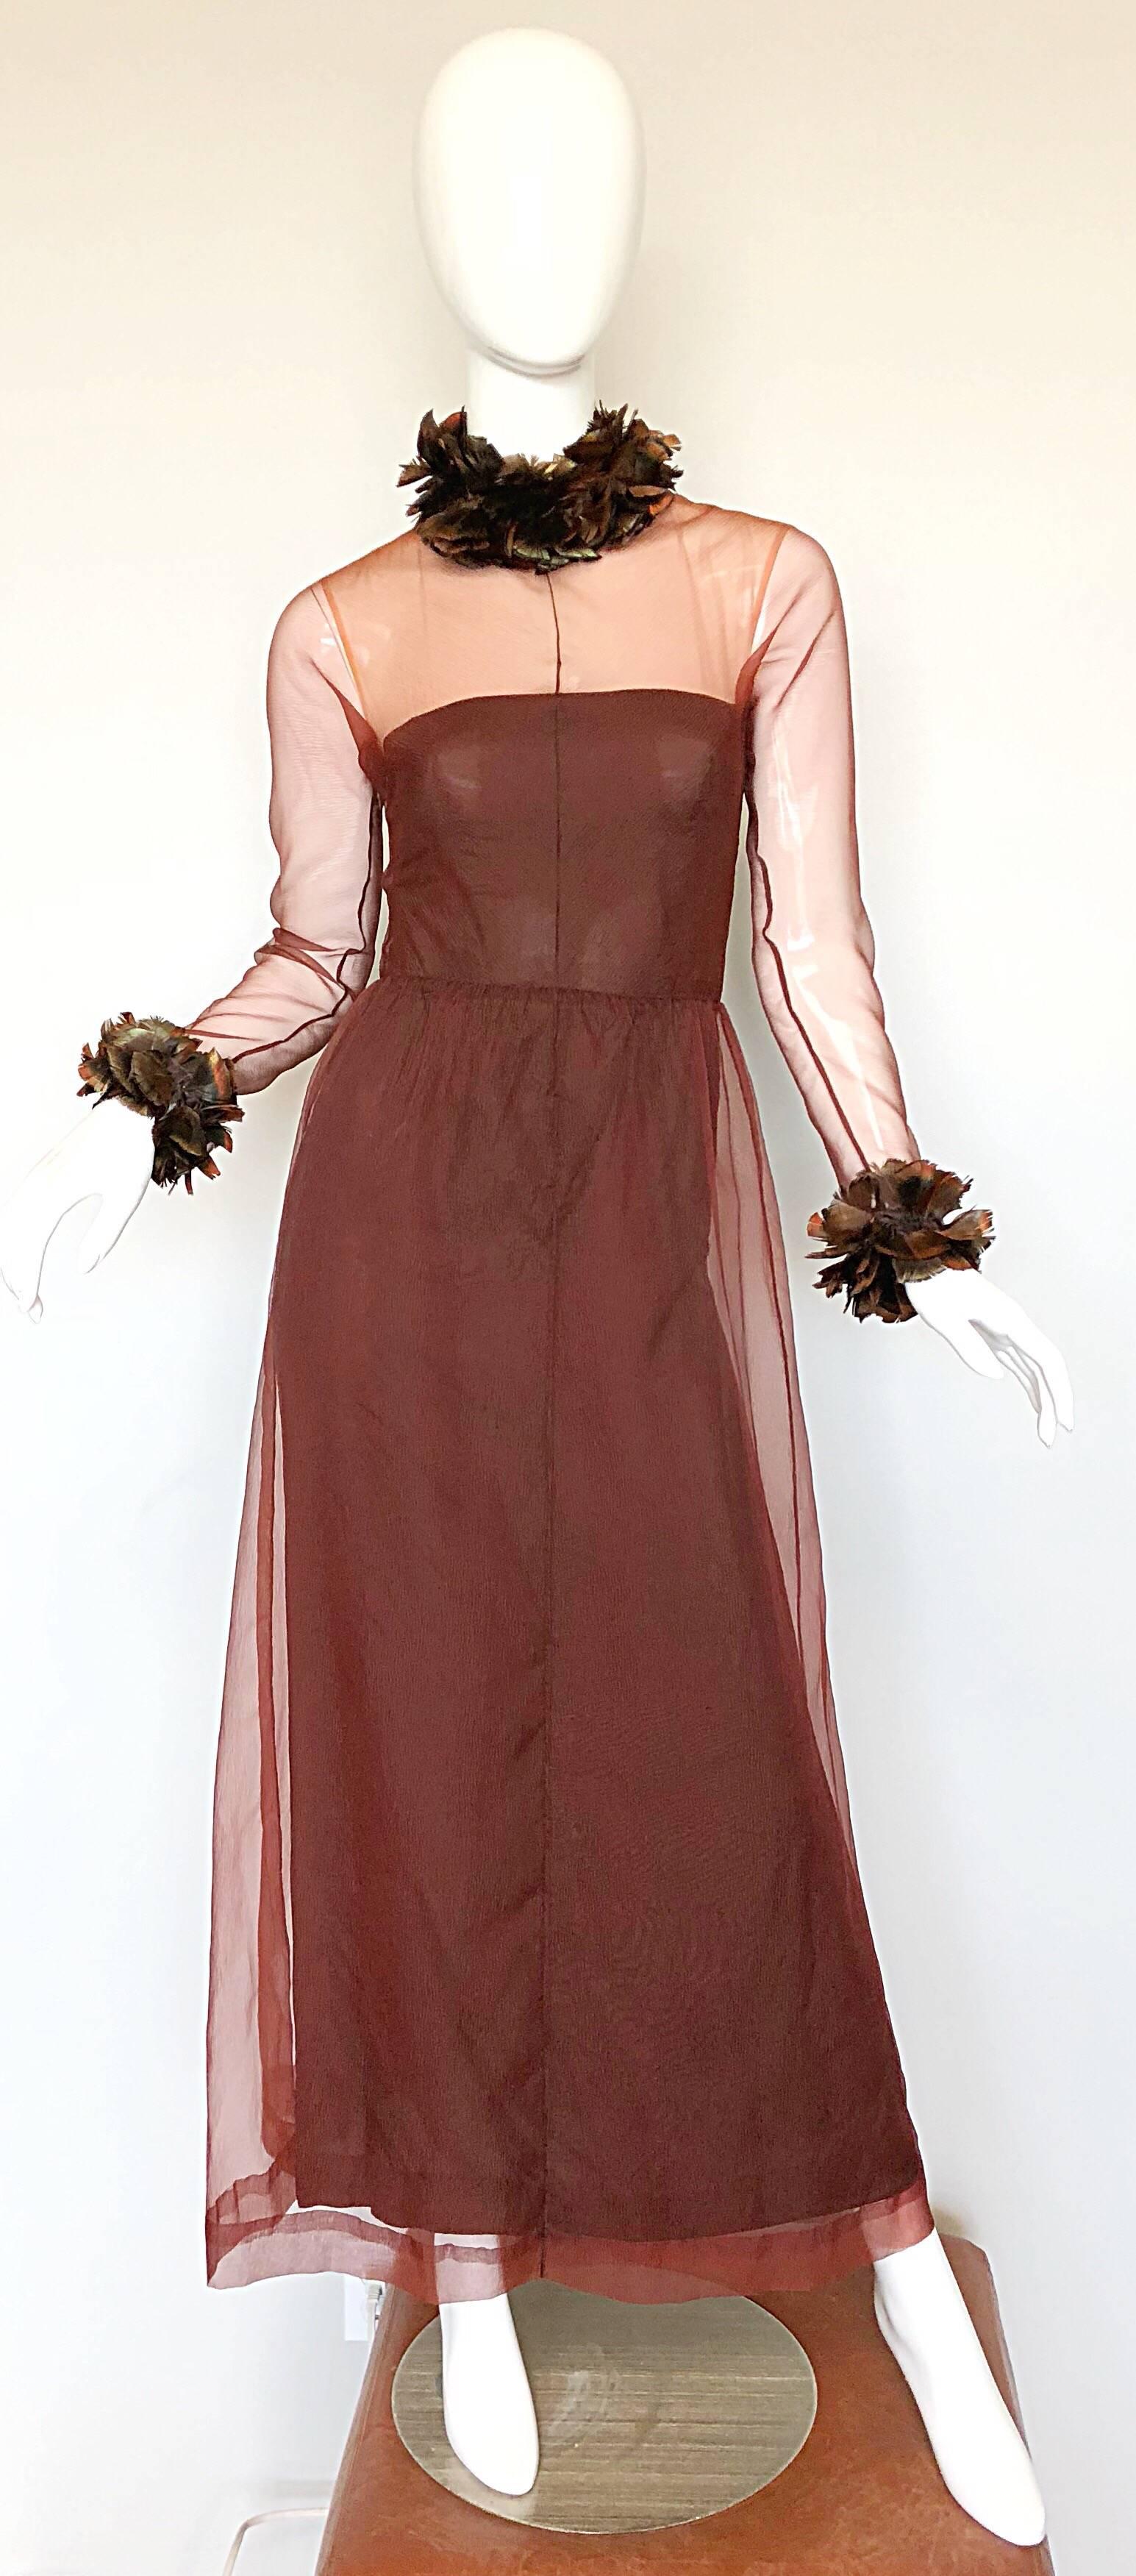 Amazing S/S 1971 GIVENCHY couture numbered chocolate brown silk chiffon evening dress! This early 70s dress is extremely well made. Features a nude illusion tailored bodice with semi sheer sleeves. Feathers around the full collar and sleeve cuffs.